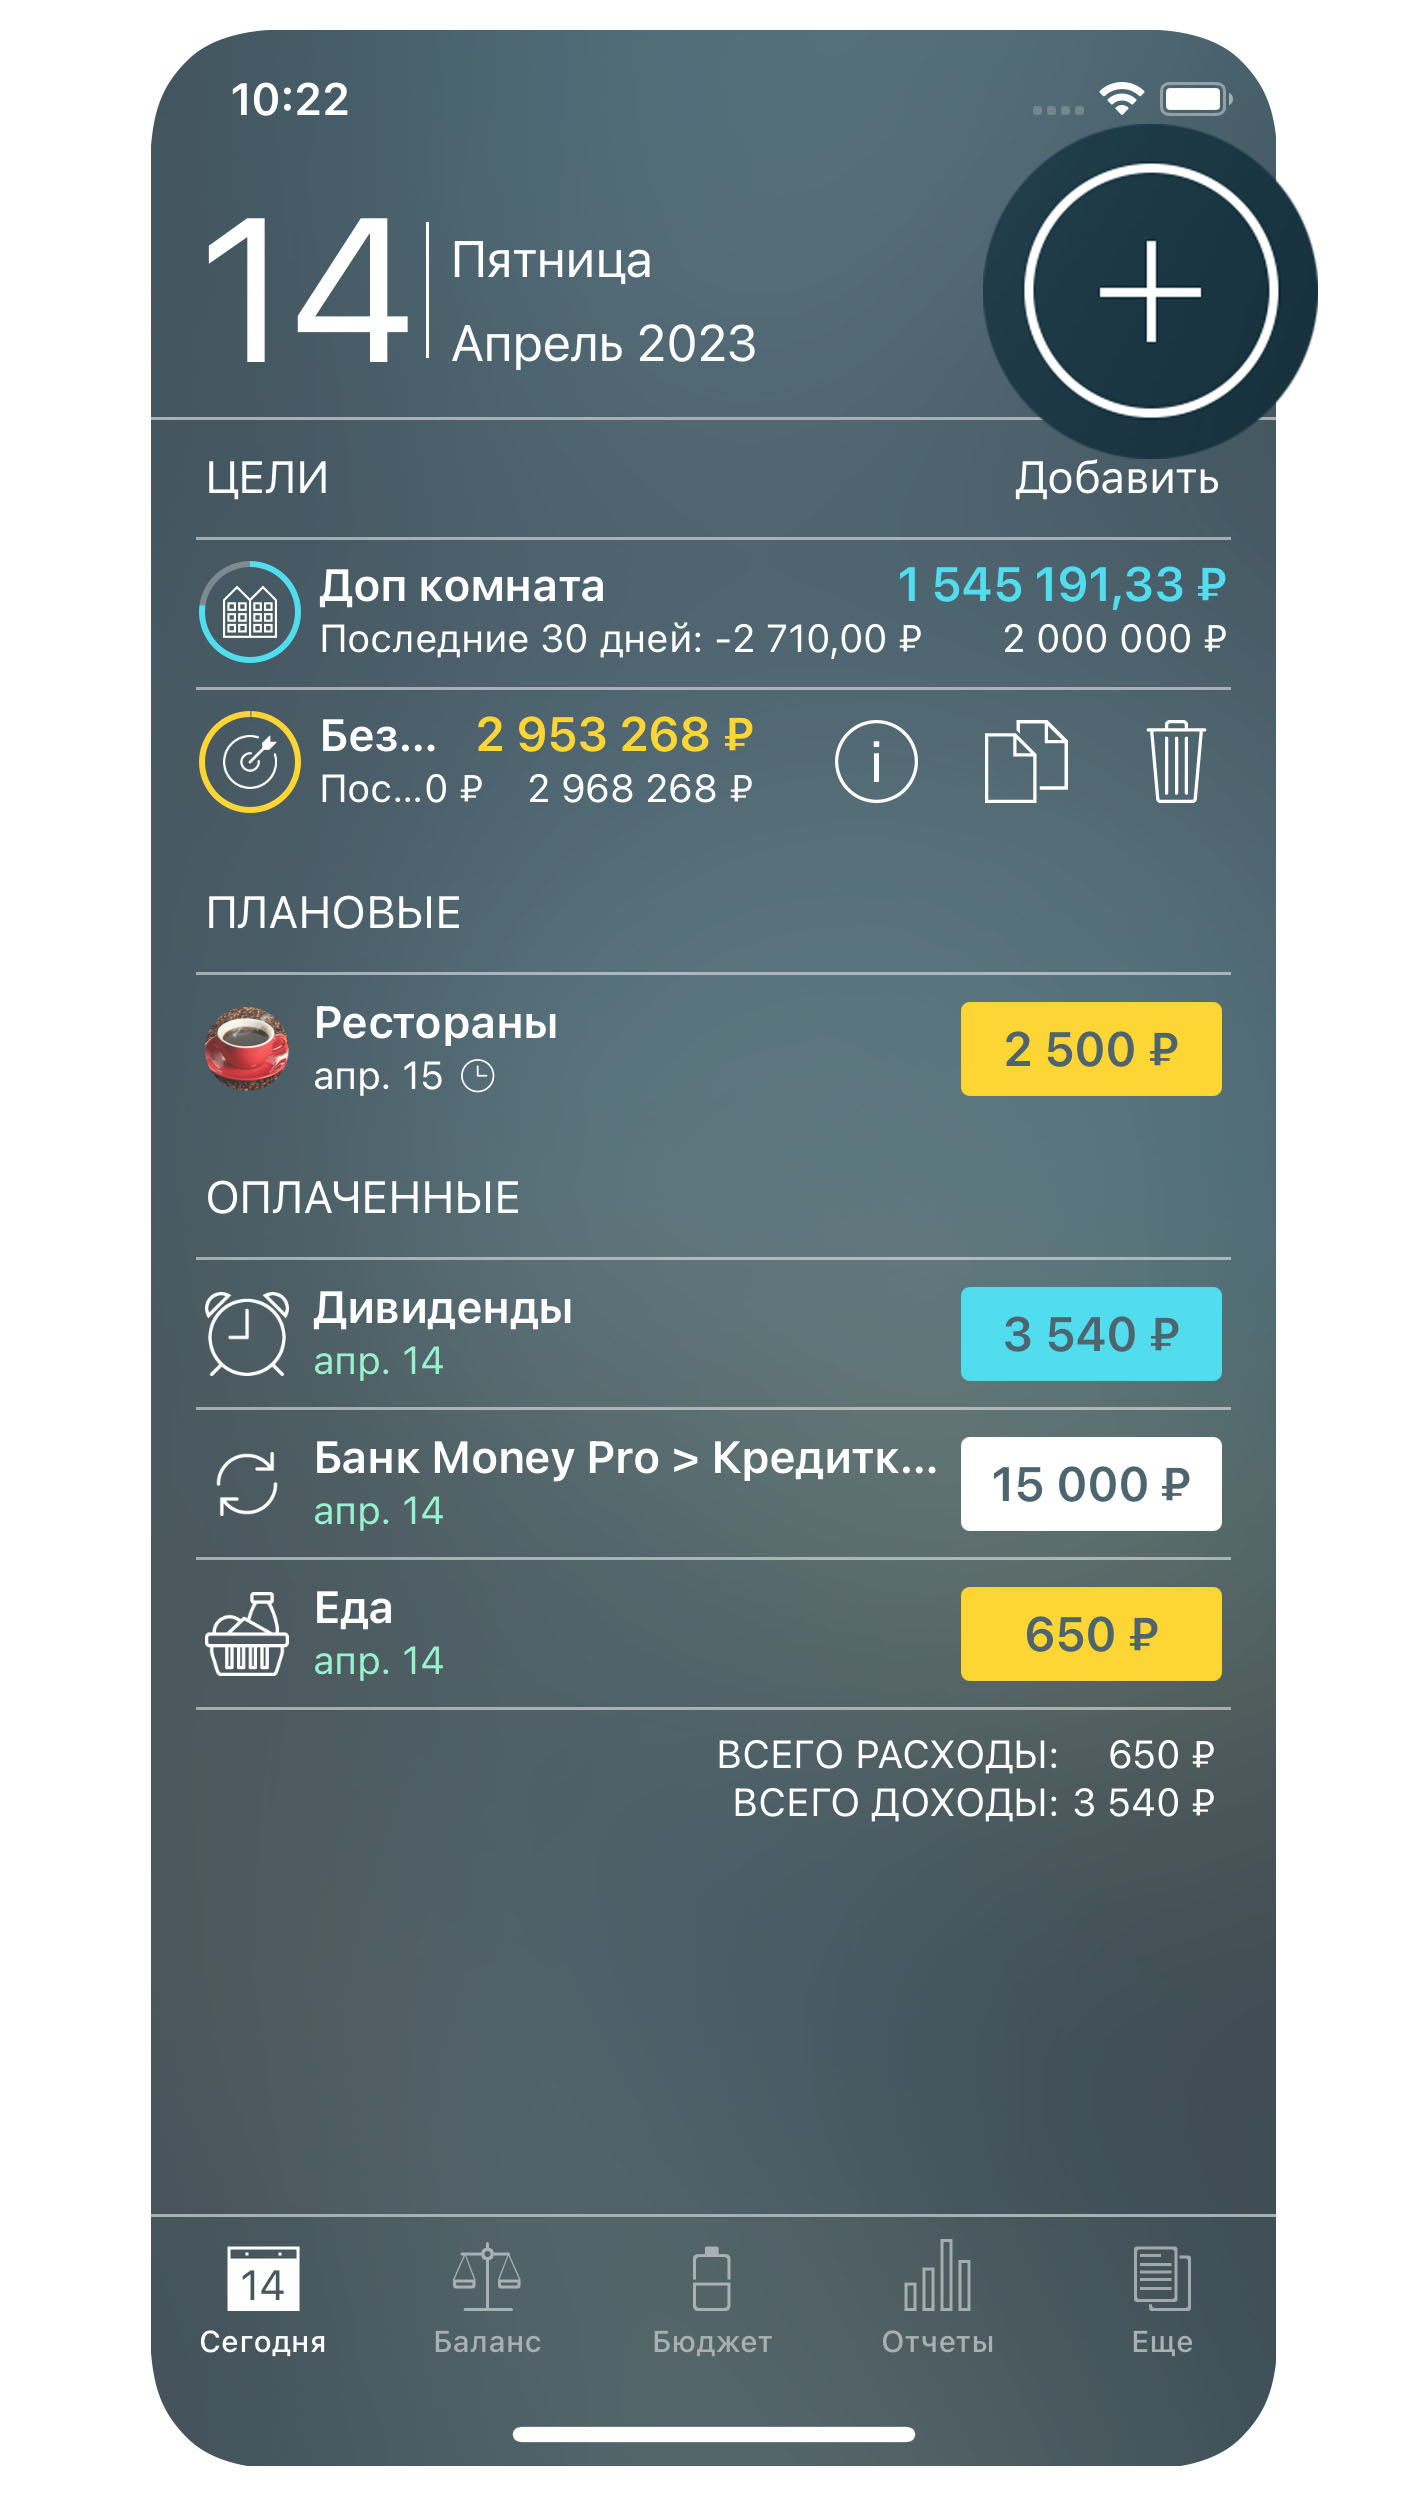 Money Pro for iphone download